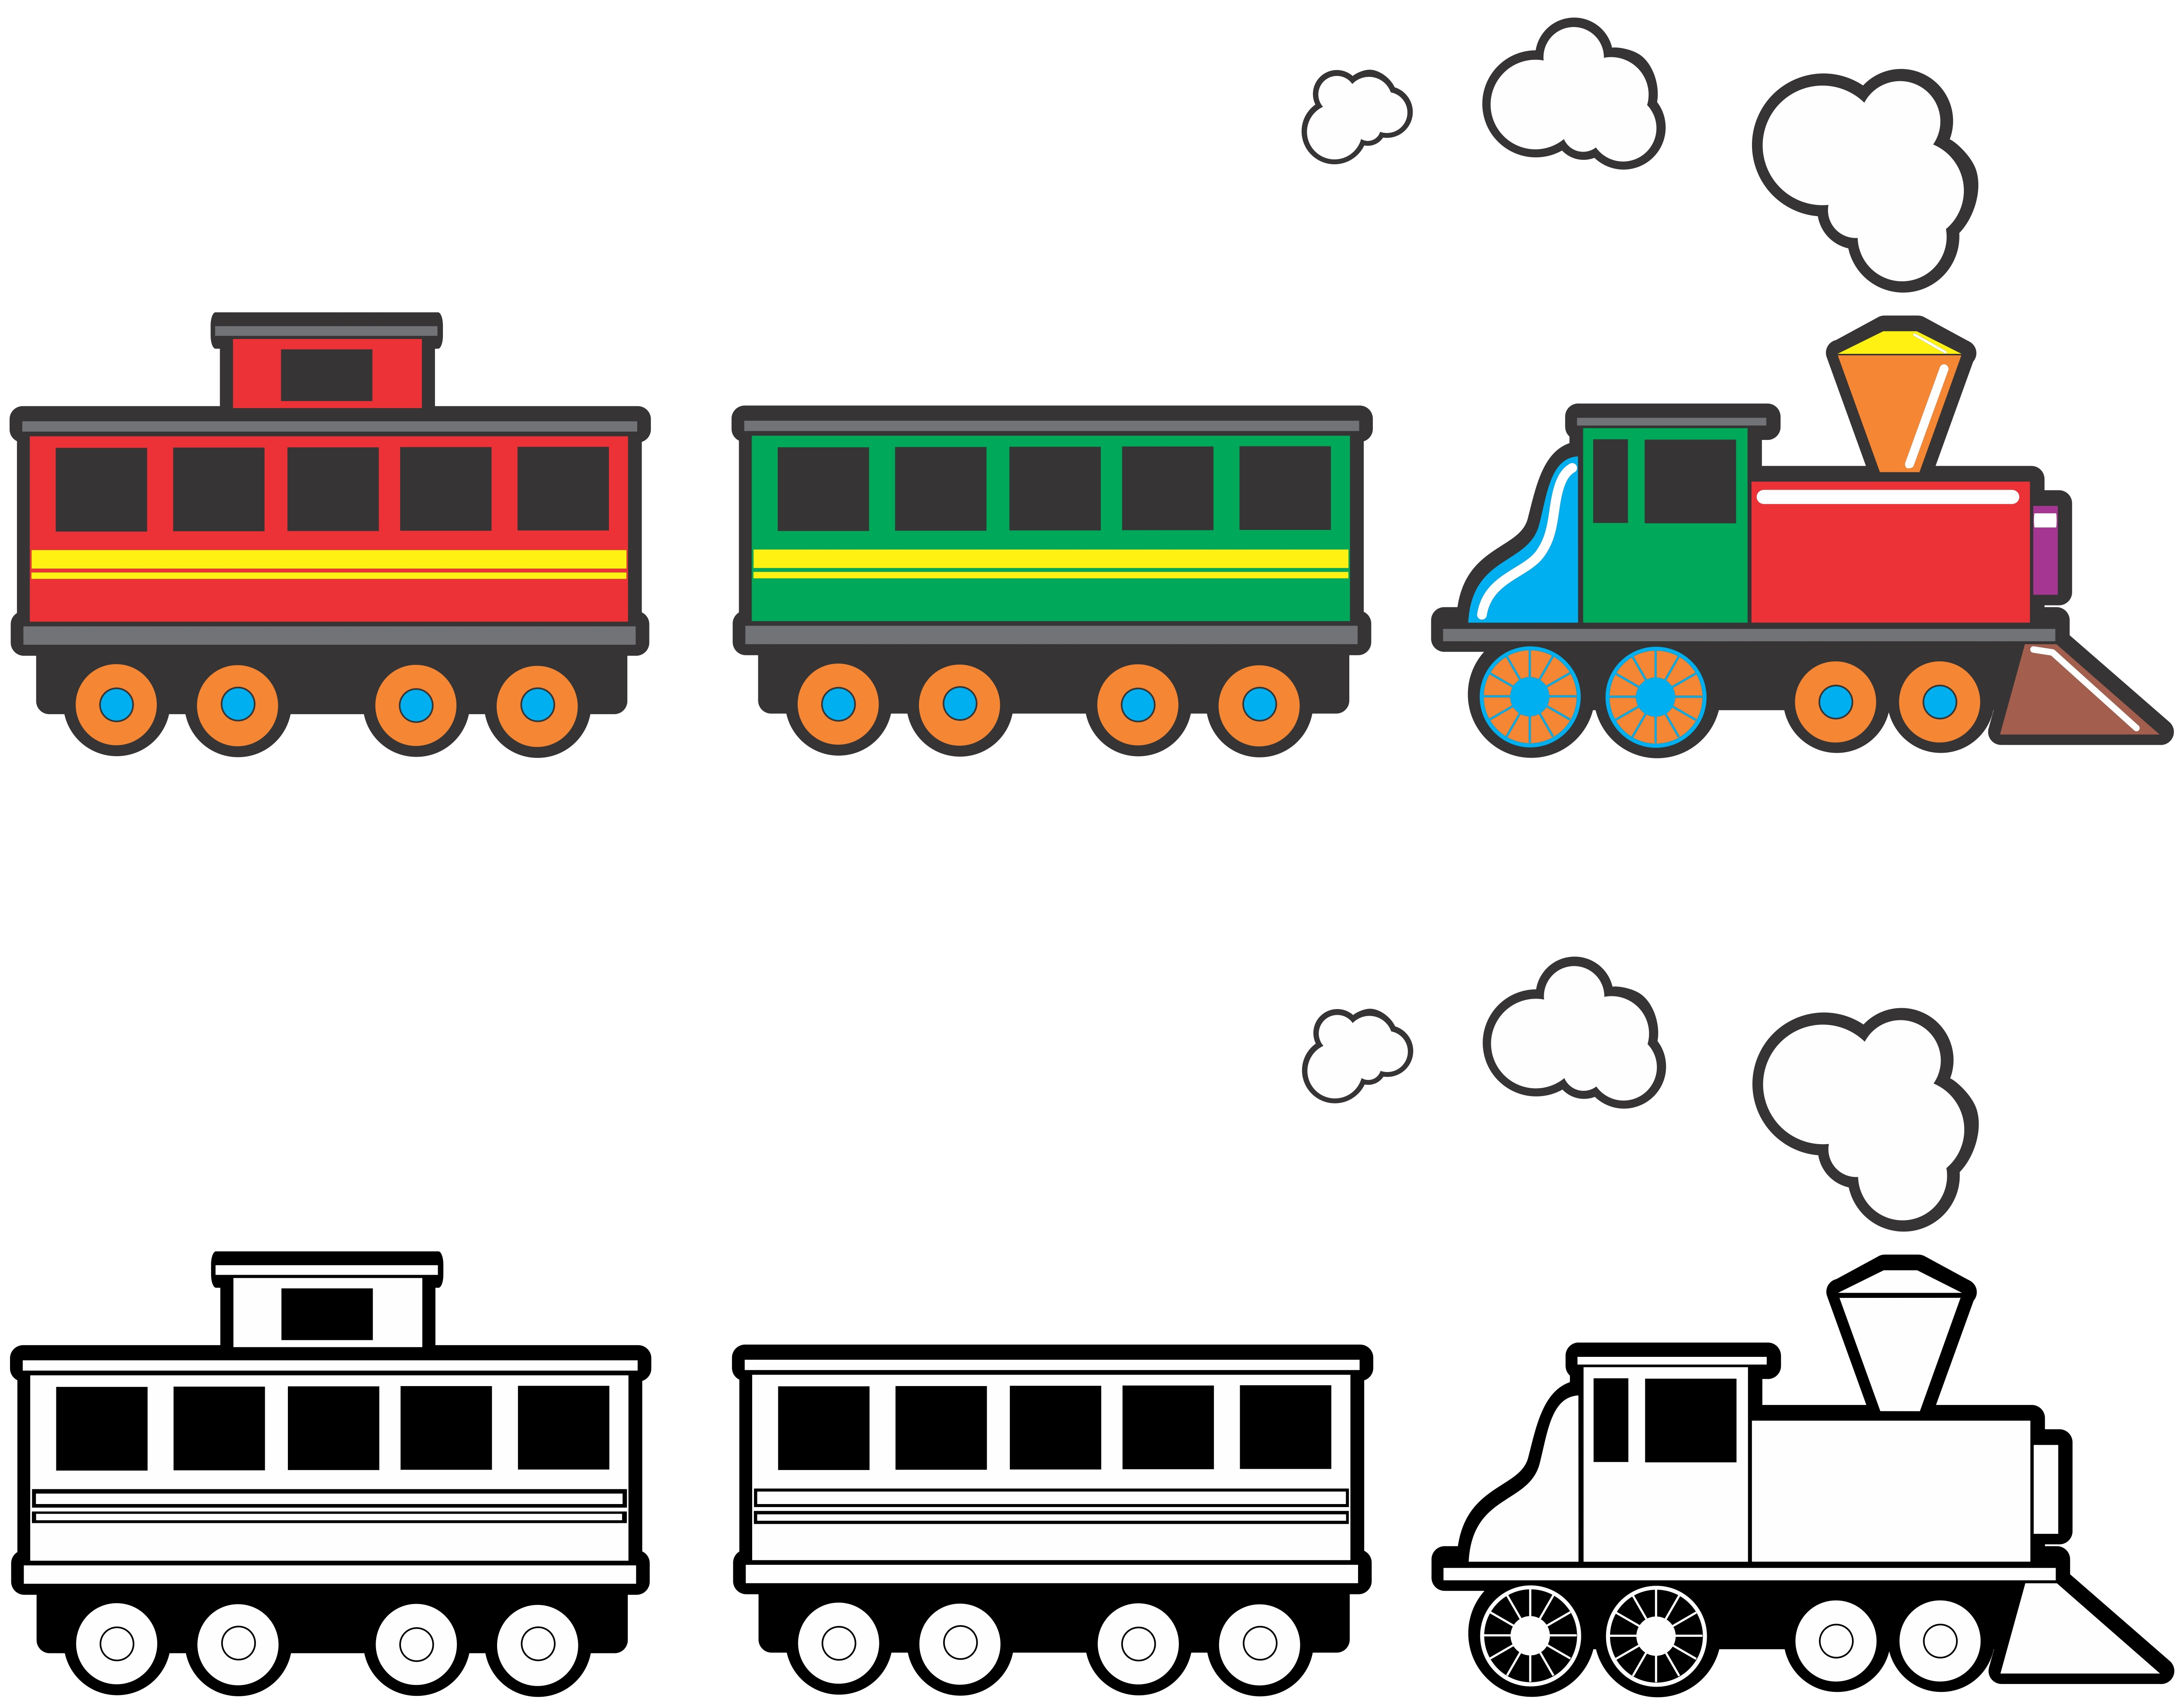 Train car clipart images free